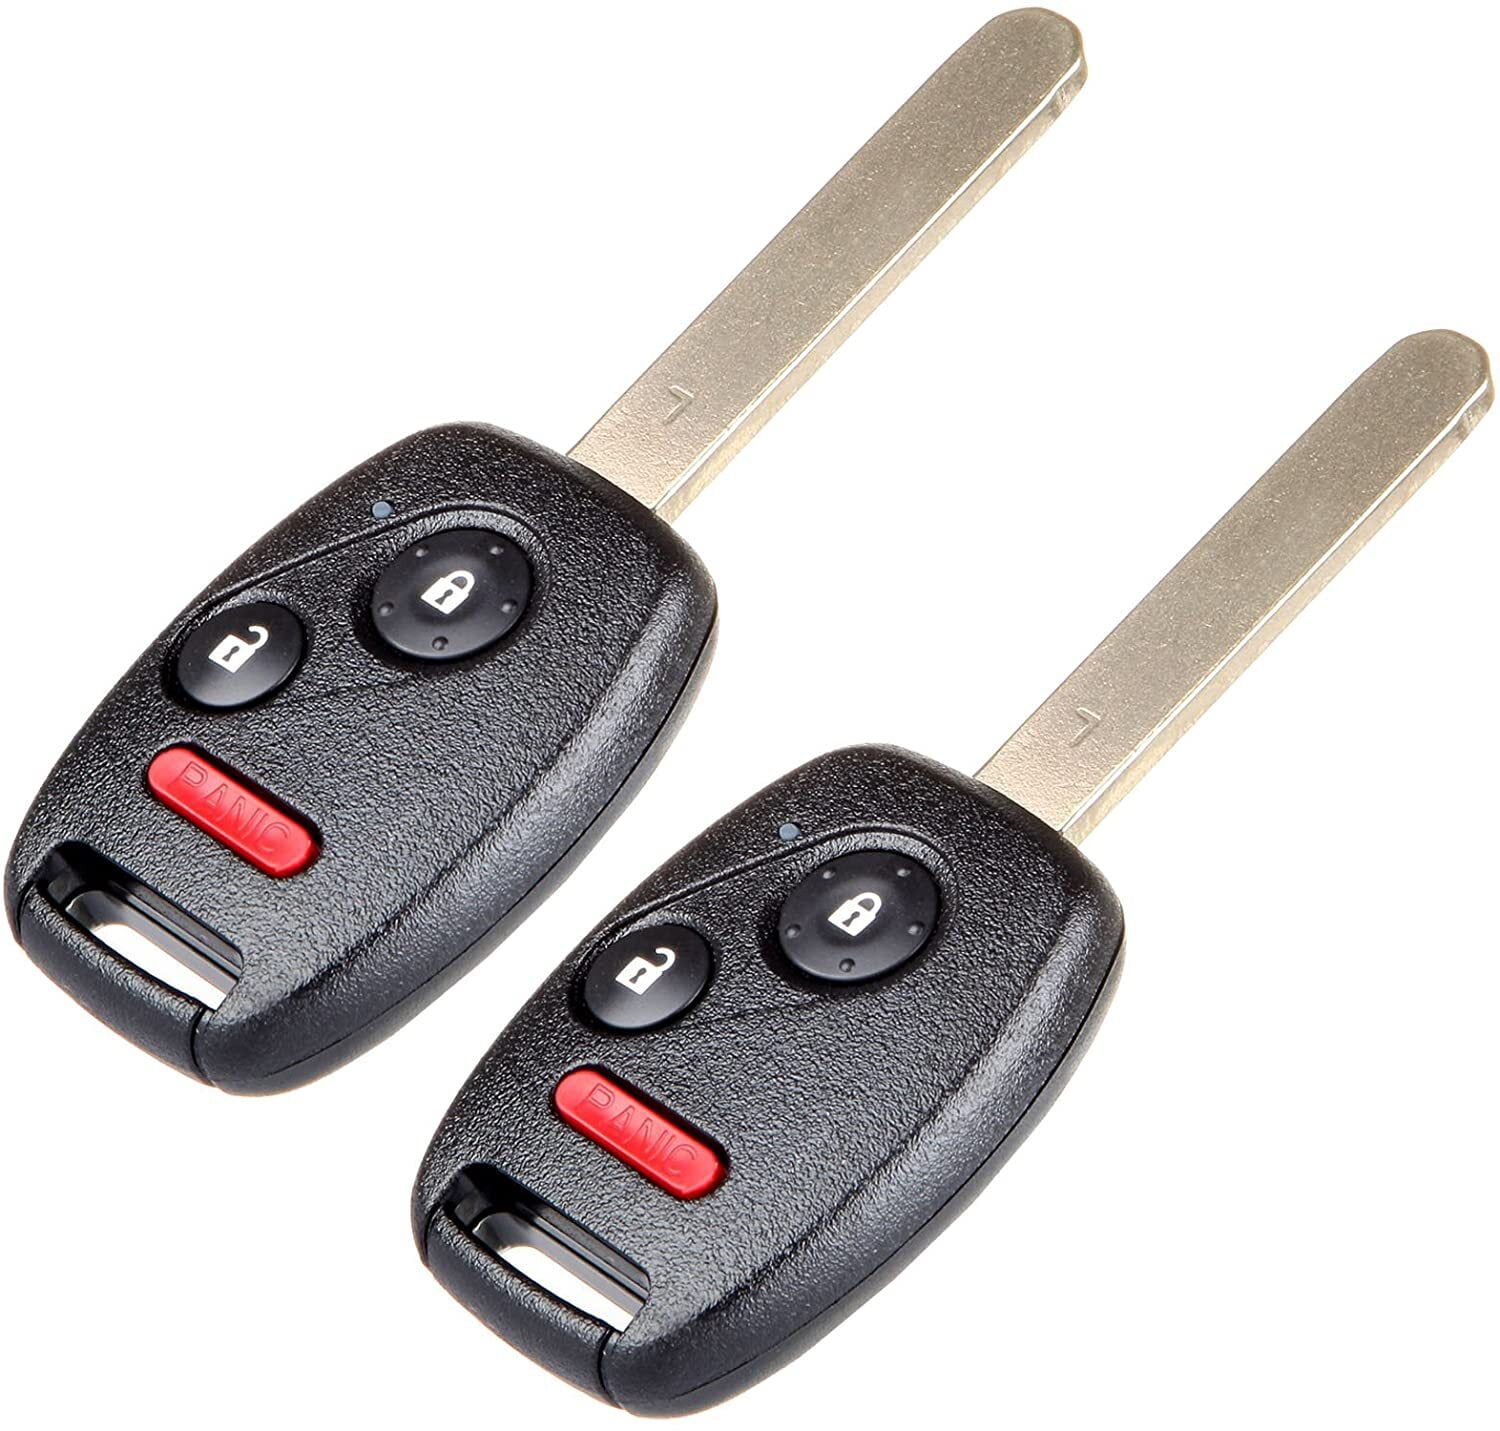 Pack of 2 ECCPP Replacement Uncut 313.8MHz Keyless Entry Remote Car Key Fob fit for Honda CR-Z CRV FIT Insight Accord Crosstour MLBHLIK-1T 